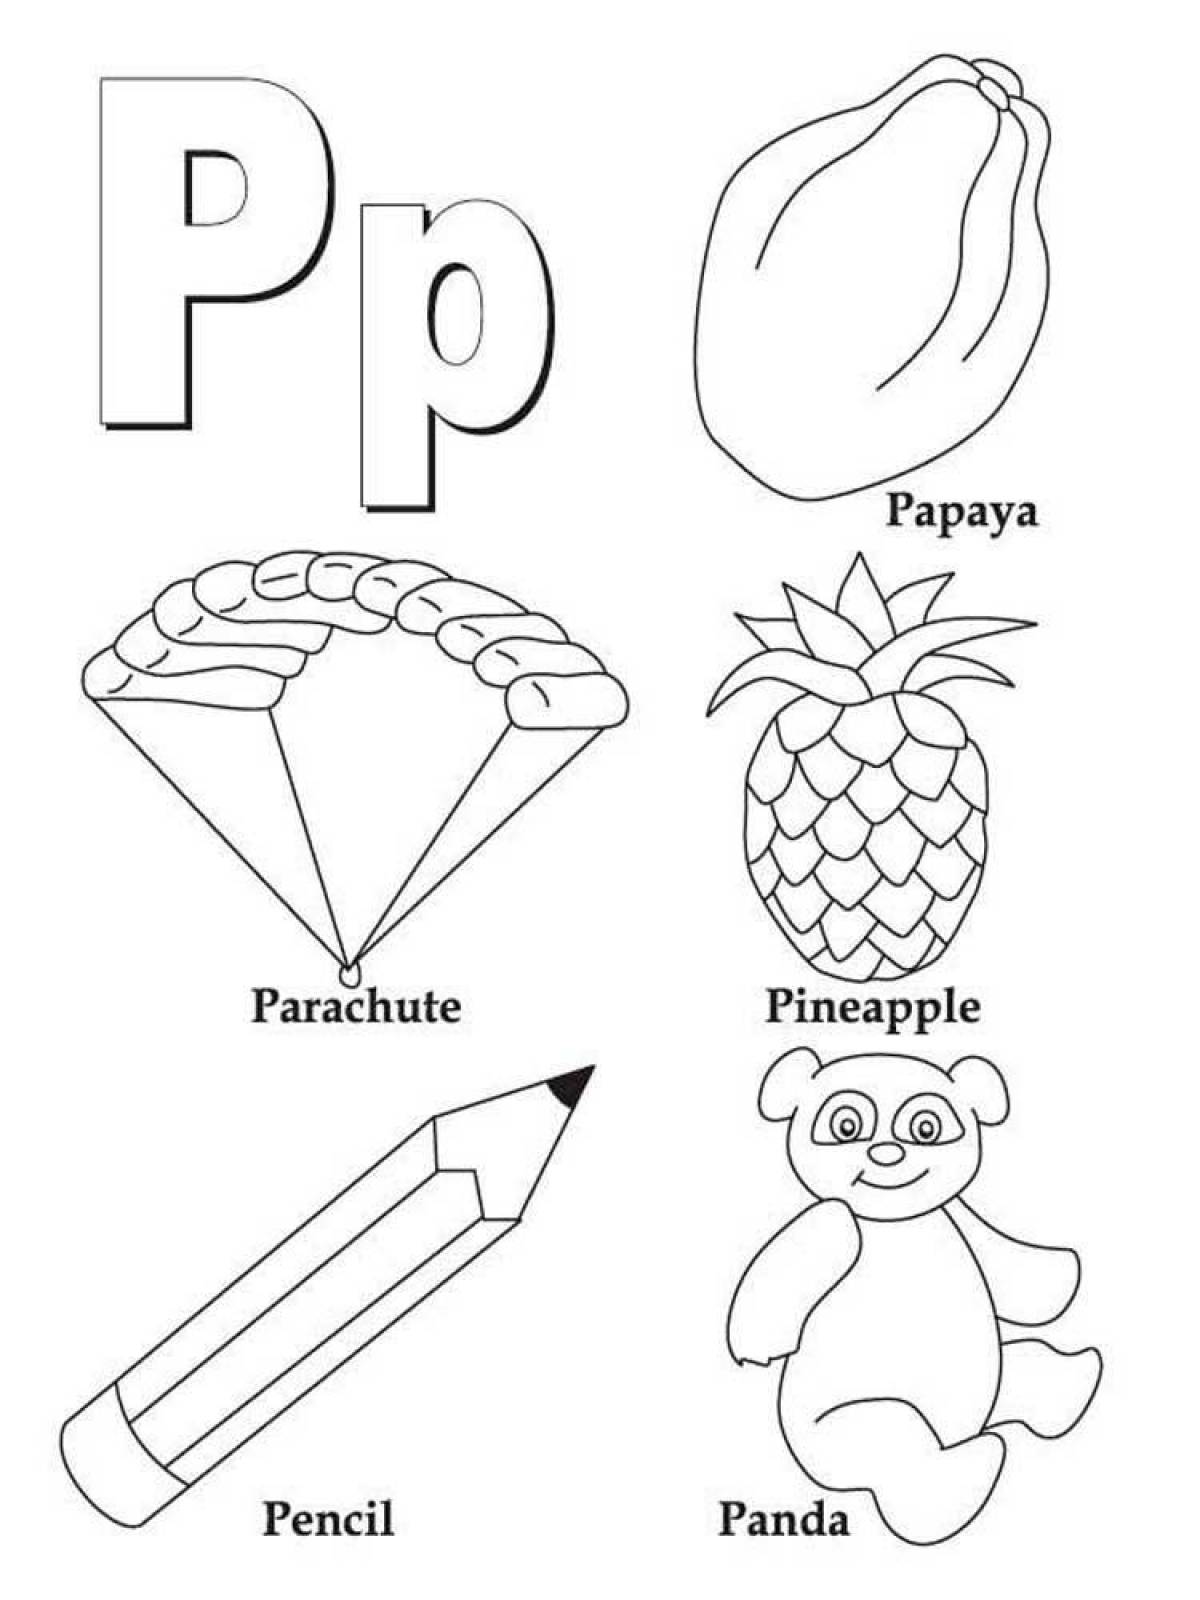 Colour coloring book with alphabet for 2nd grade children